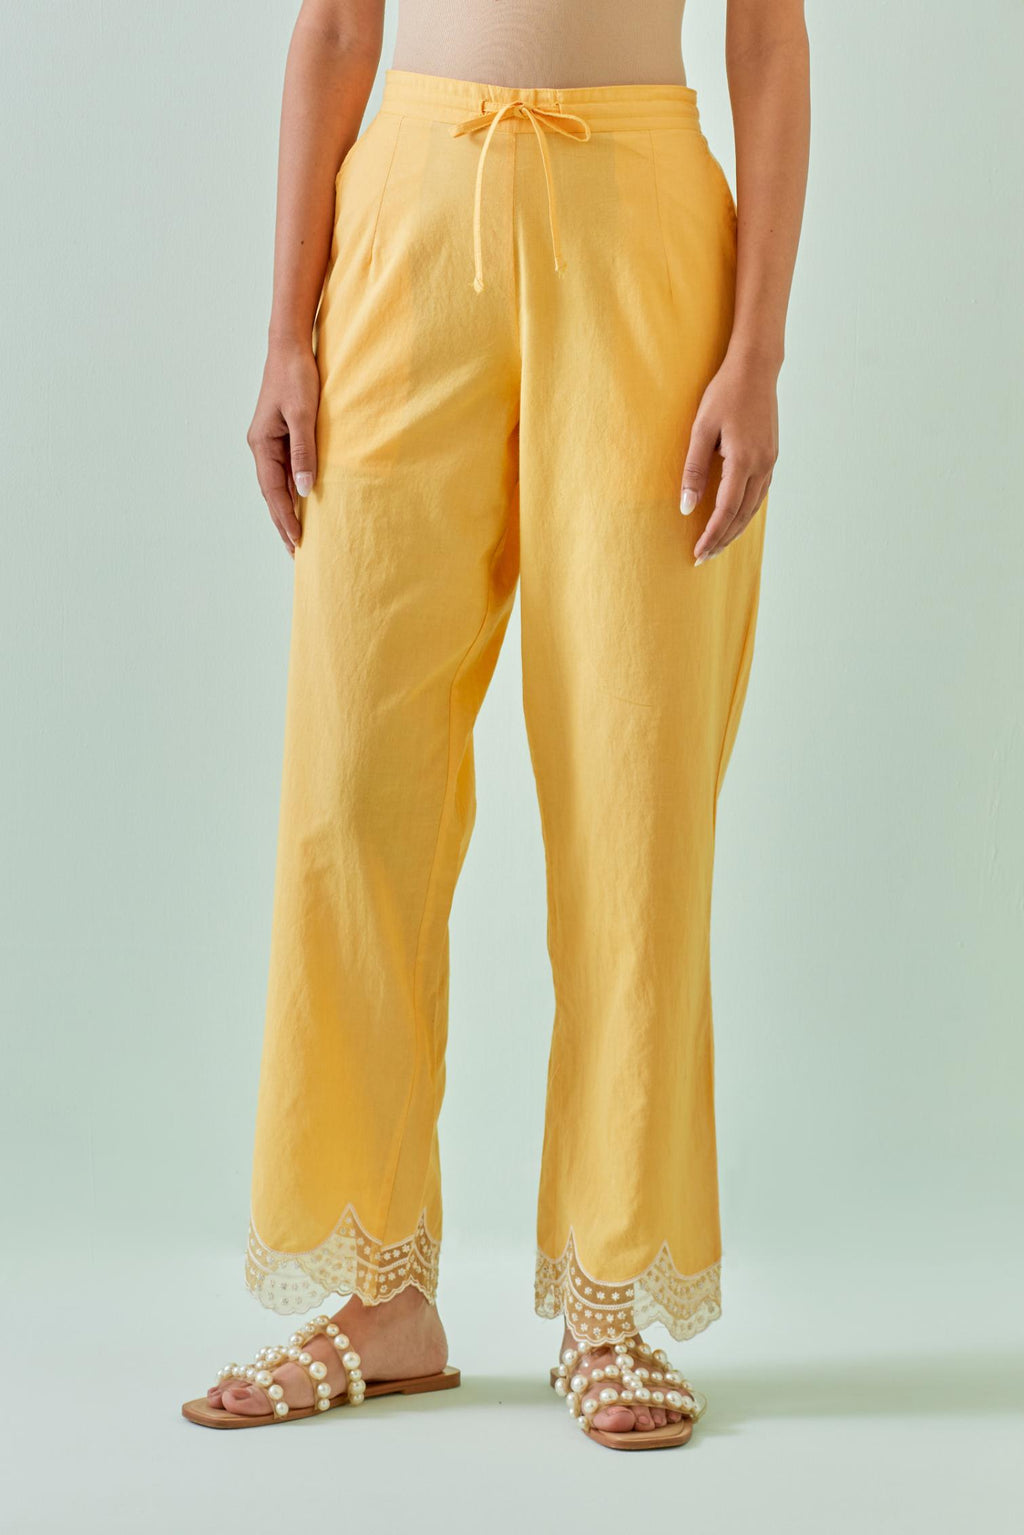 Yellow straight pants with scalloped embroidery at bottom hem.